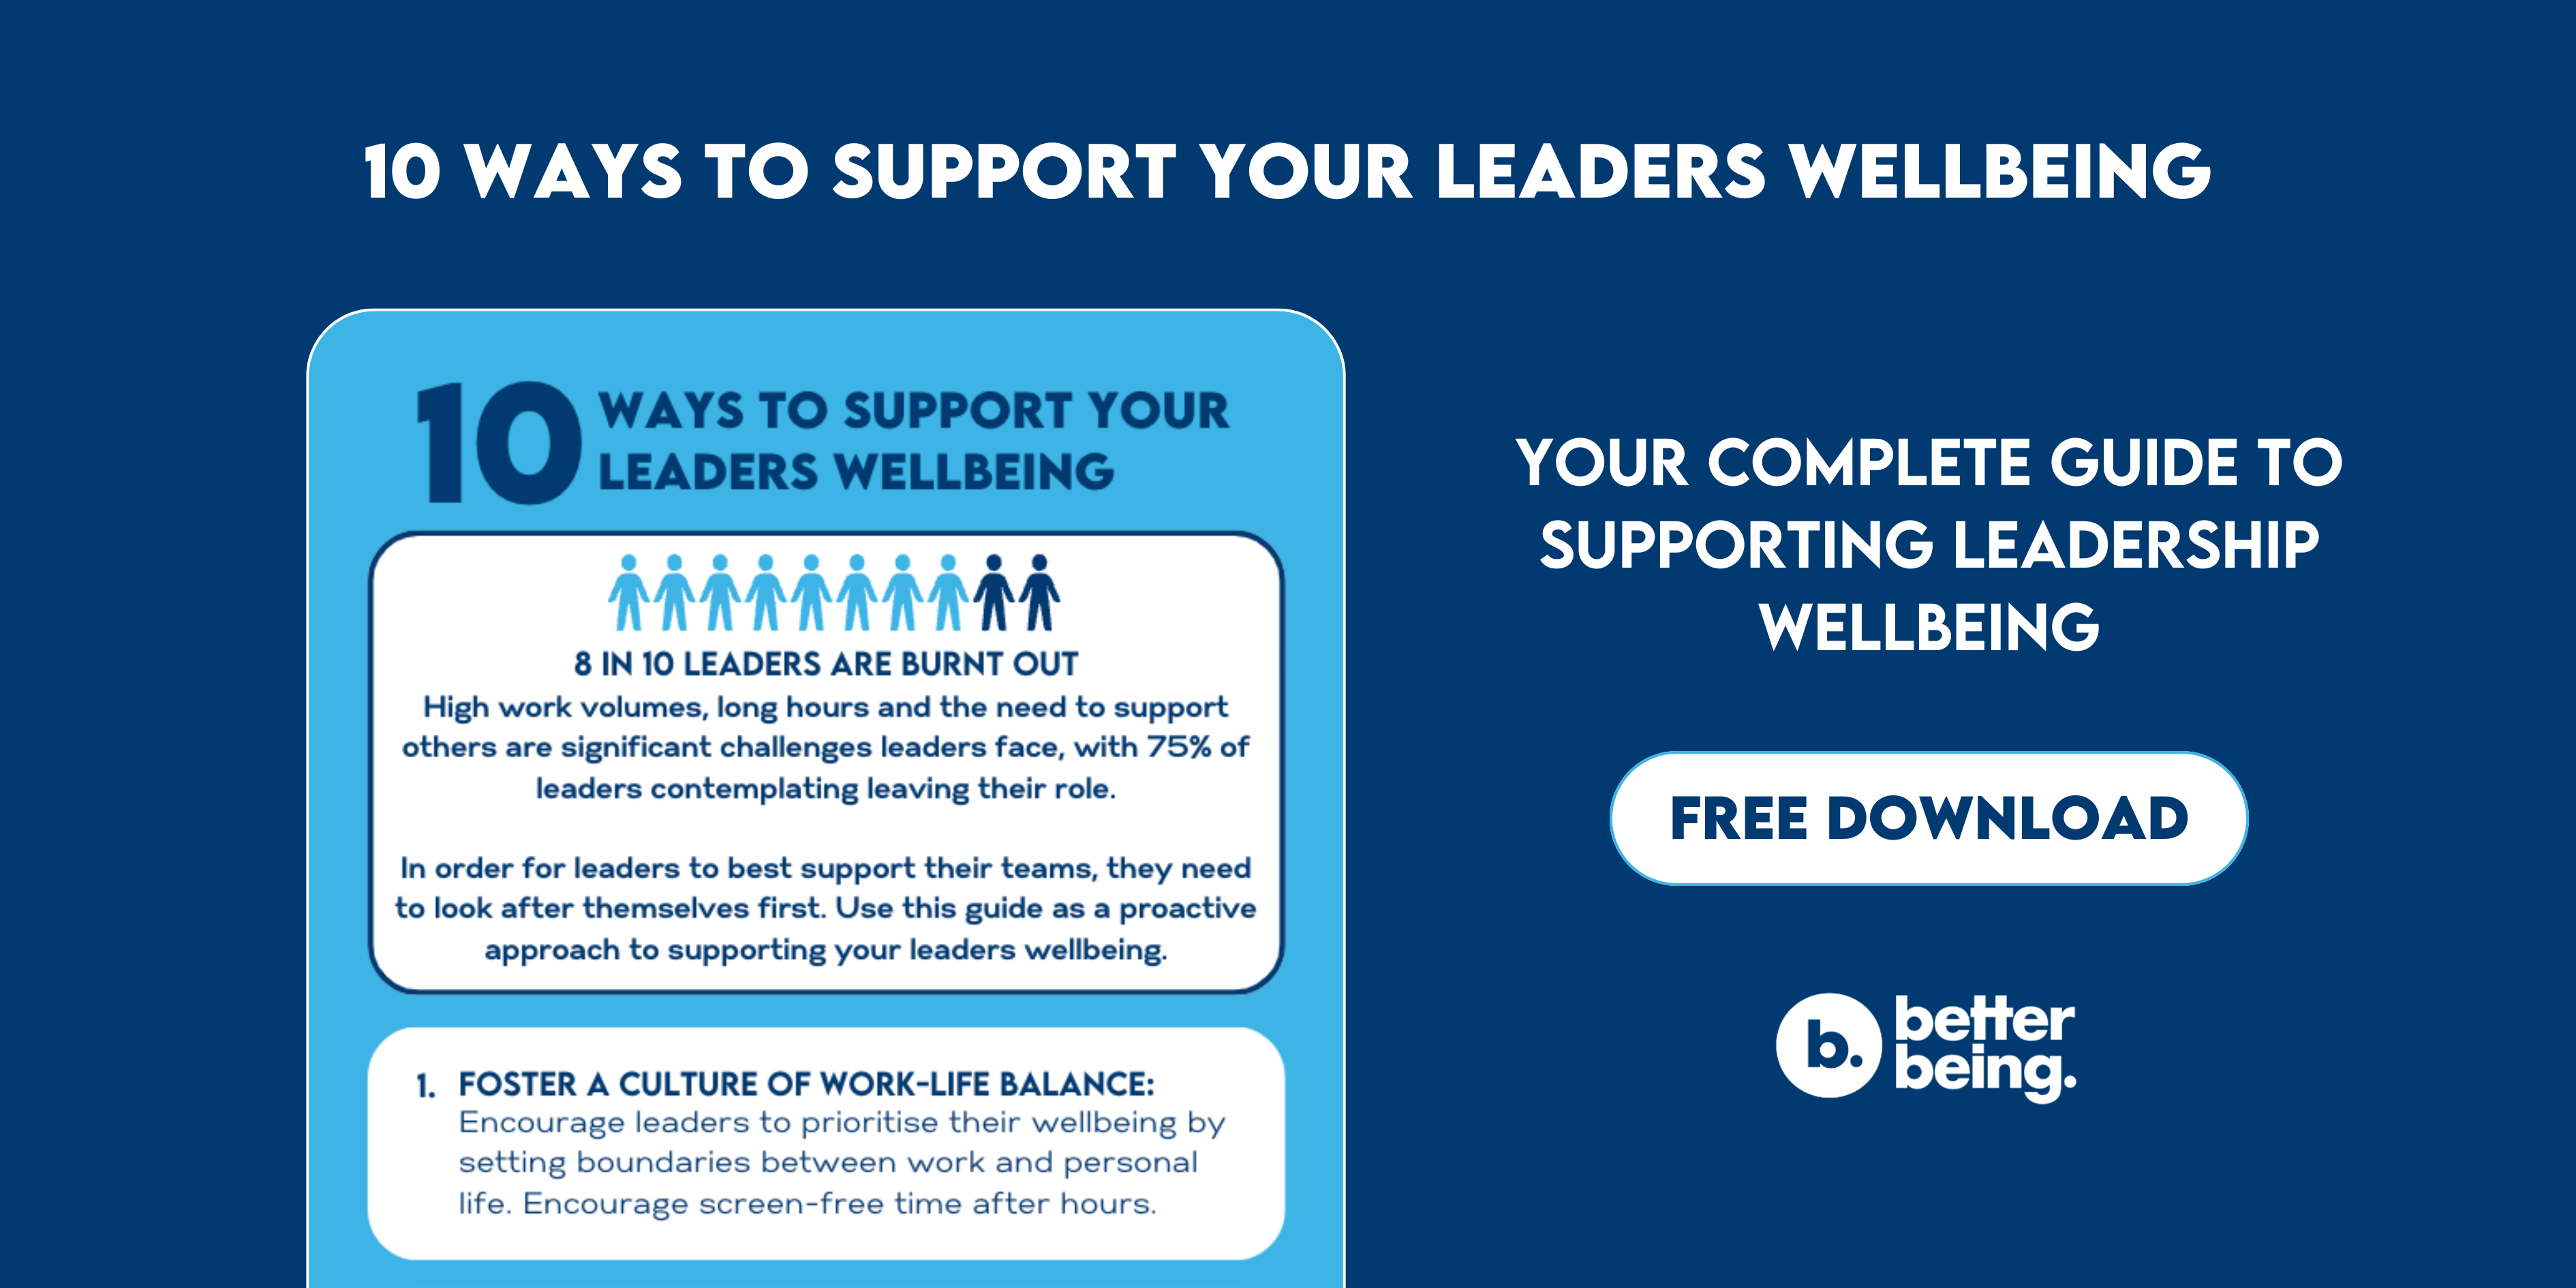 10 Ways to Support Leadership Wellbeing. Free Download